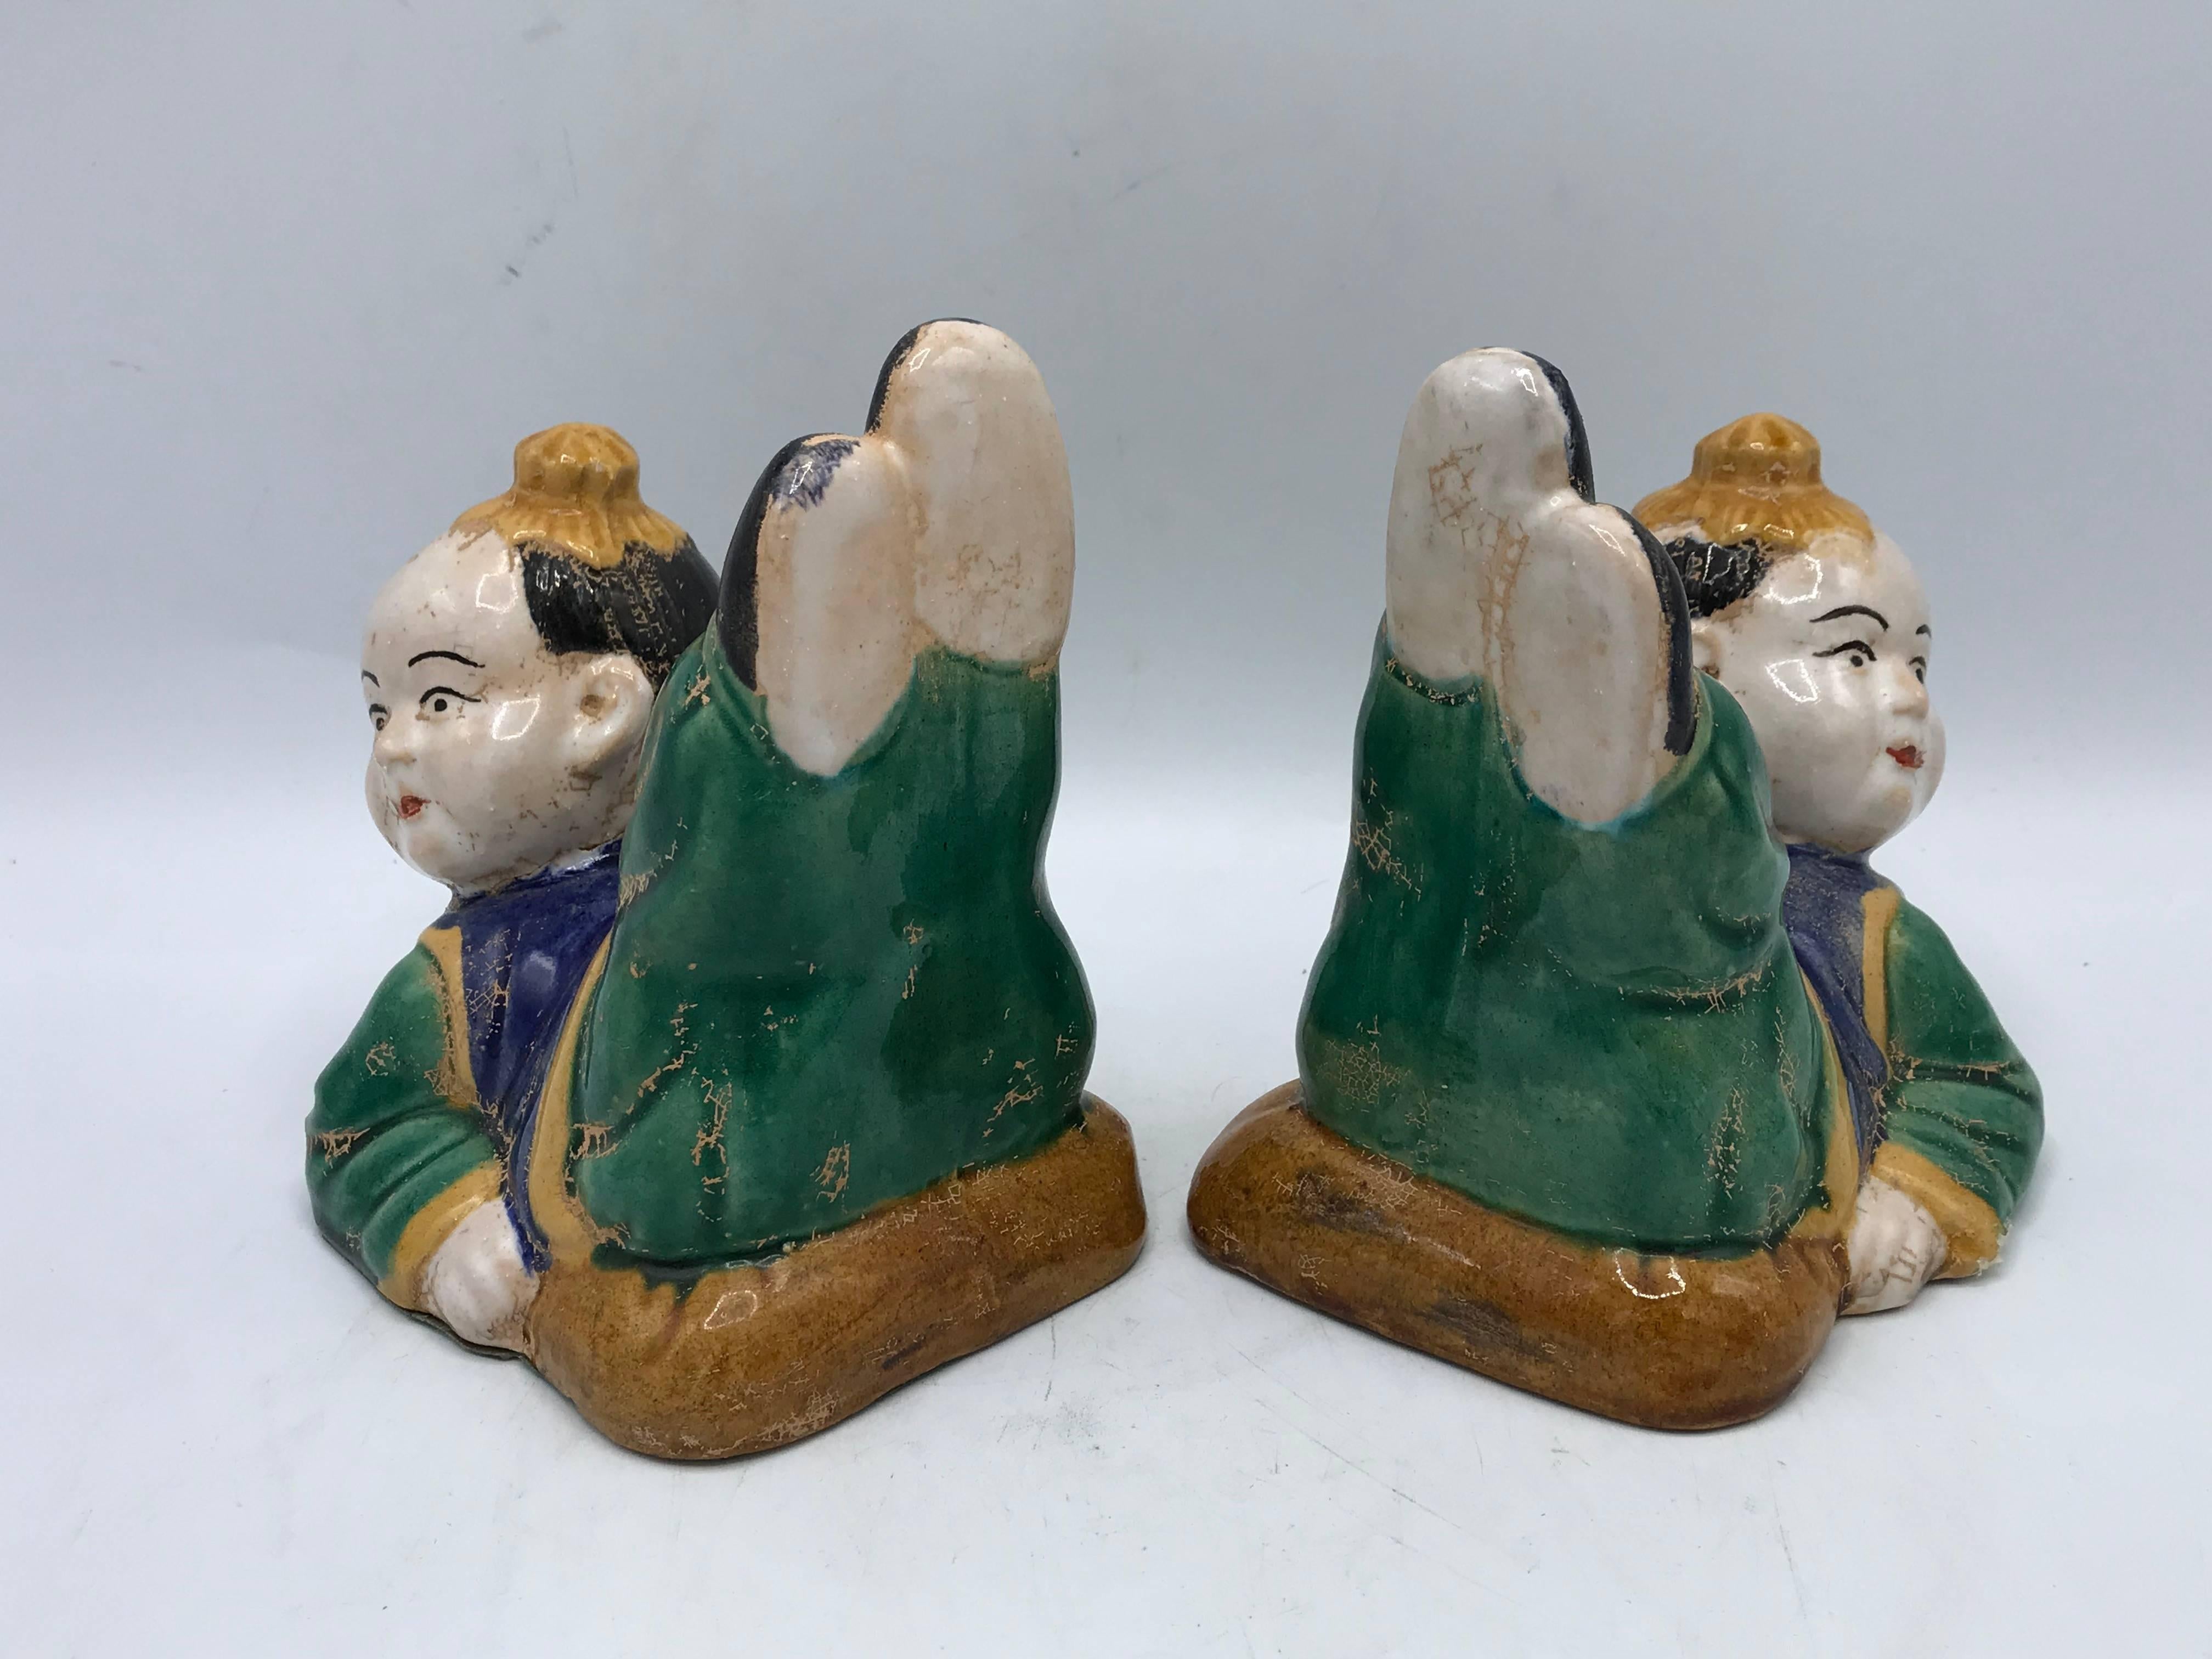 Offered is a fabulous, pair of 1960s Chinoiserie chic, sculptural Asian children bookends. These pieces would look beautiful as freestanding statues as well.